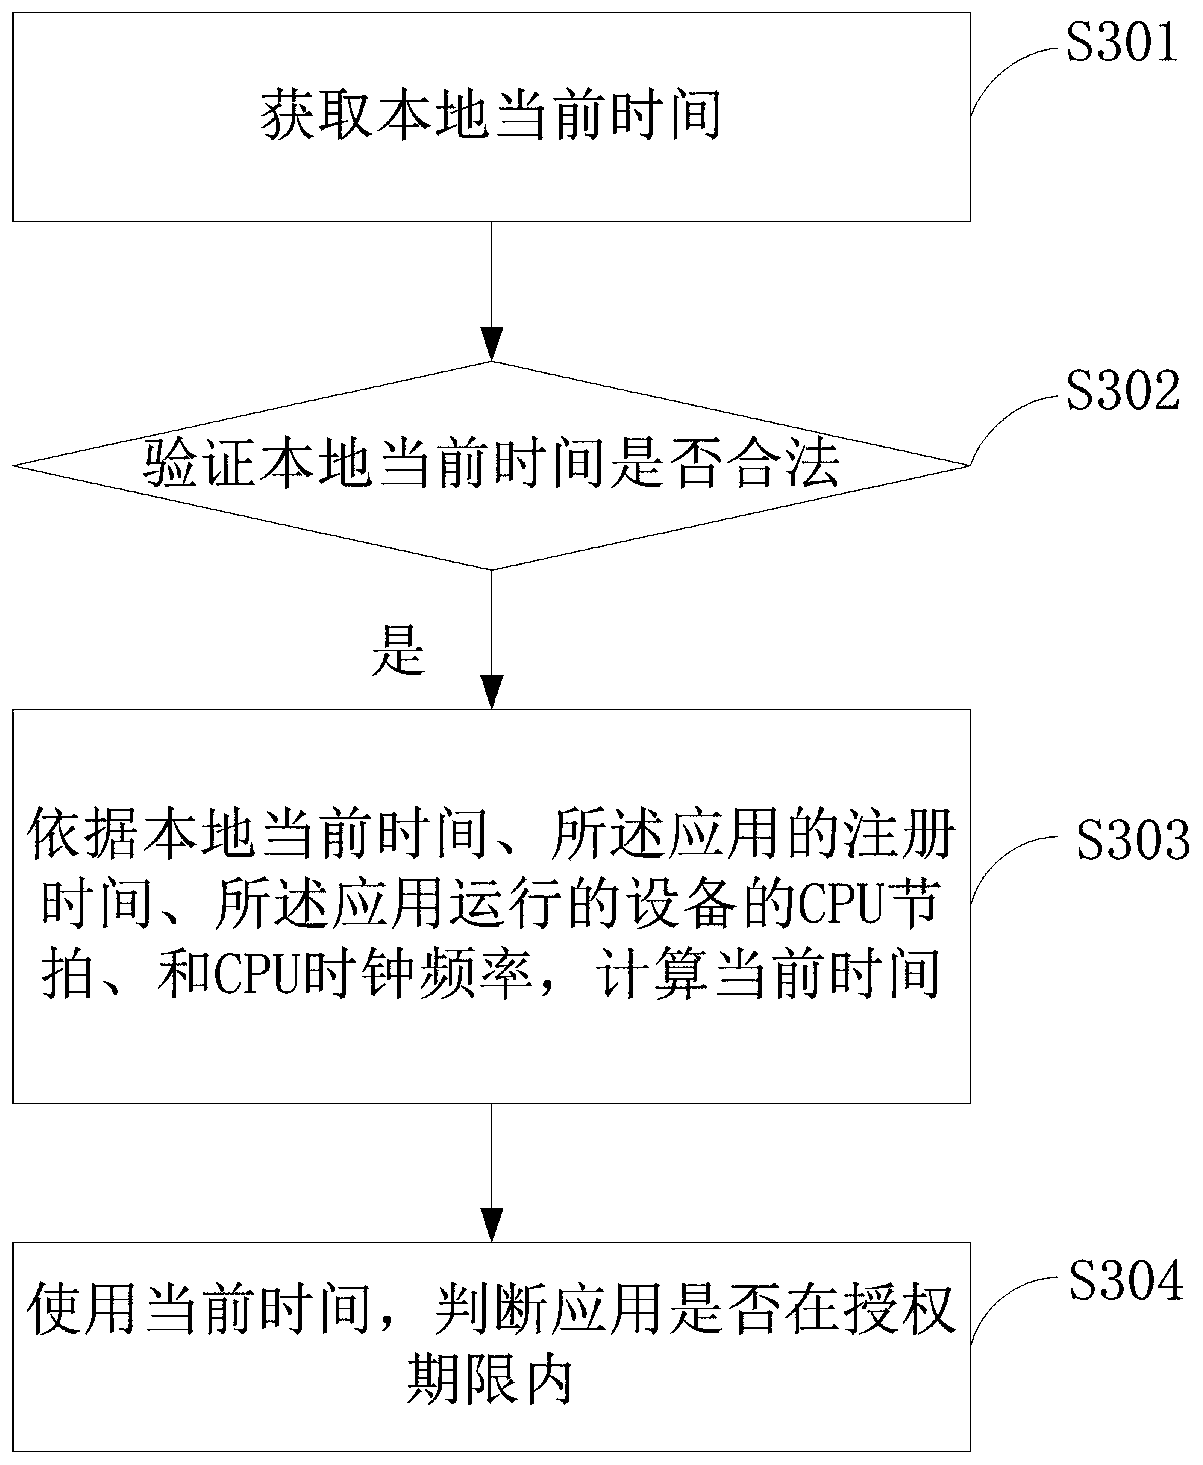 Application authorization verification method, device and system